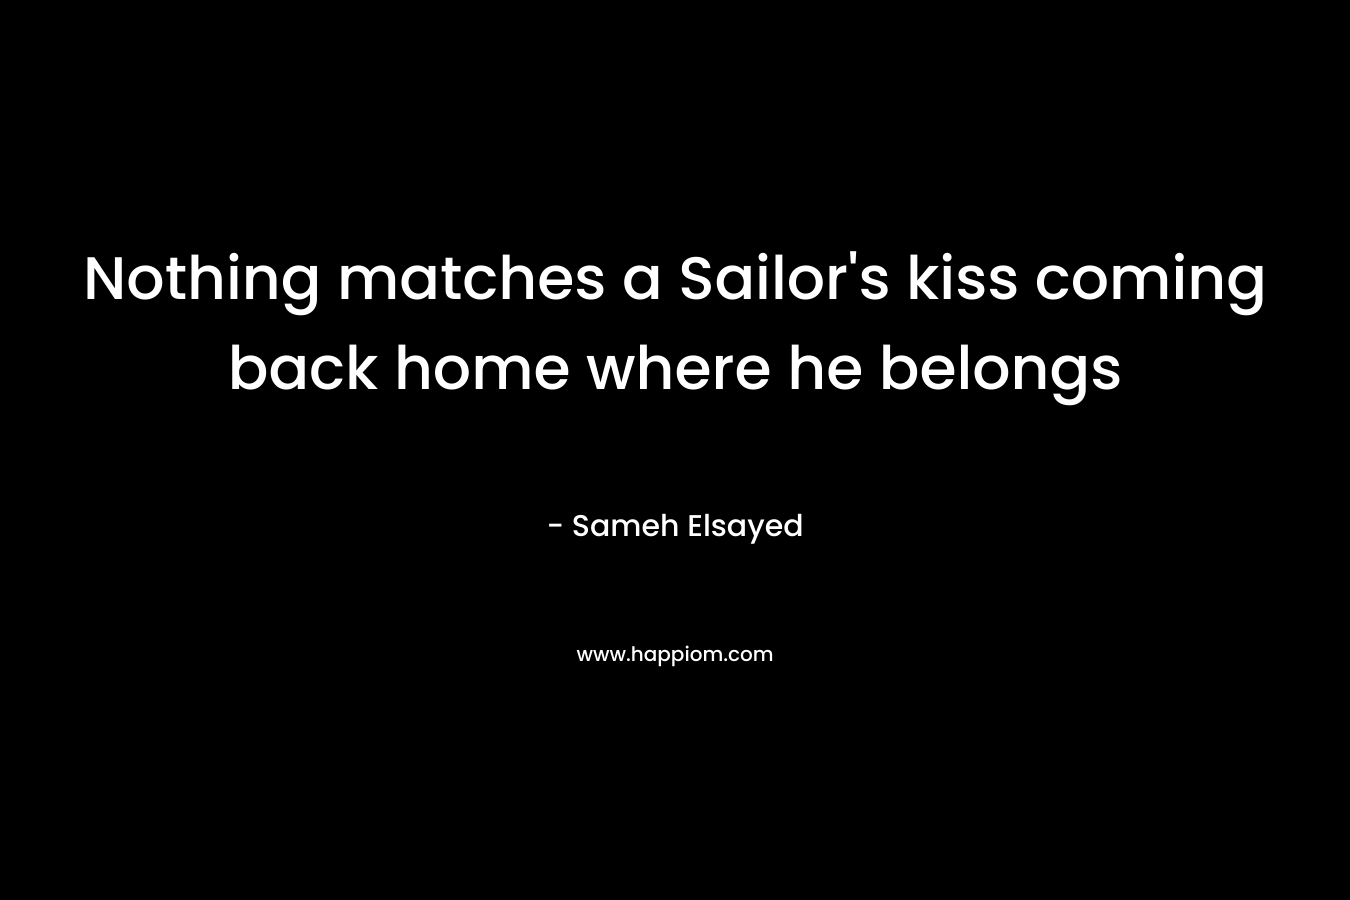 Nothing matches a Sailor's kiss coming back home where he belongs